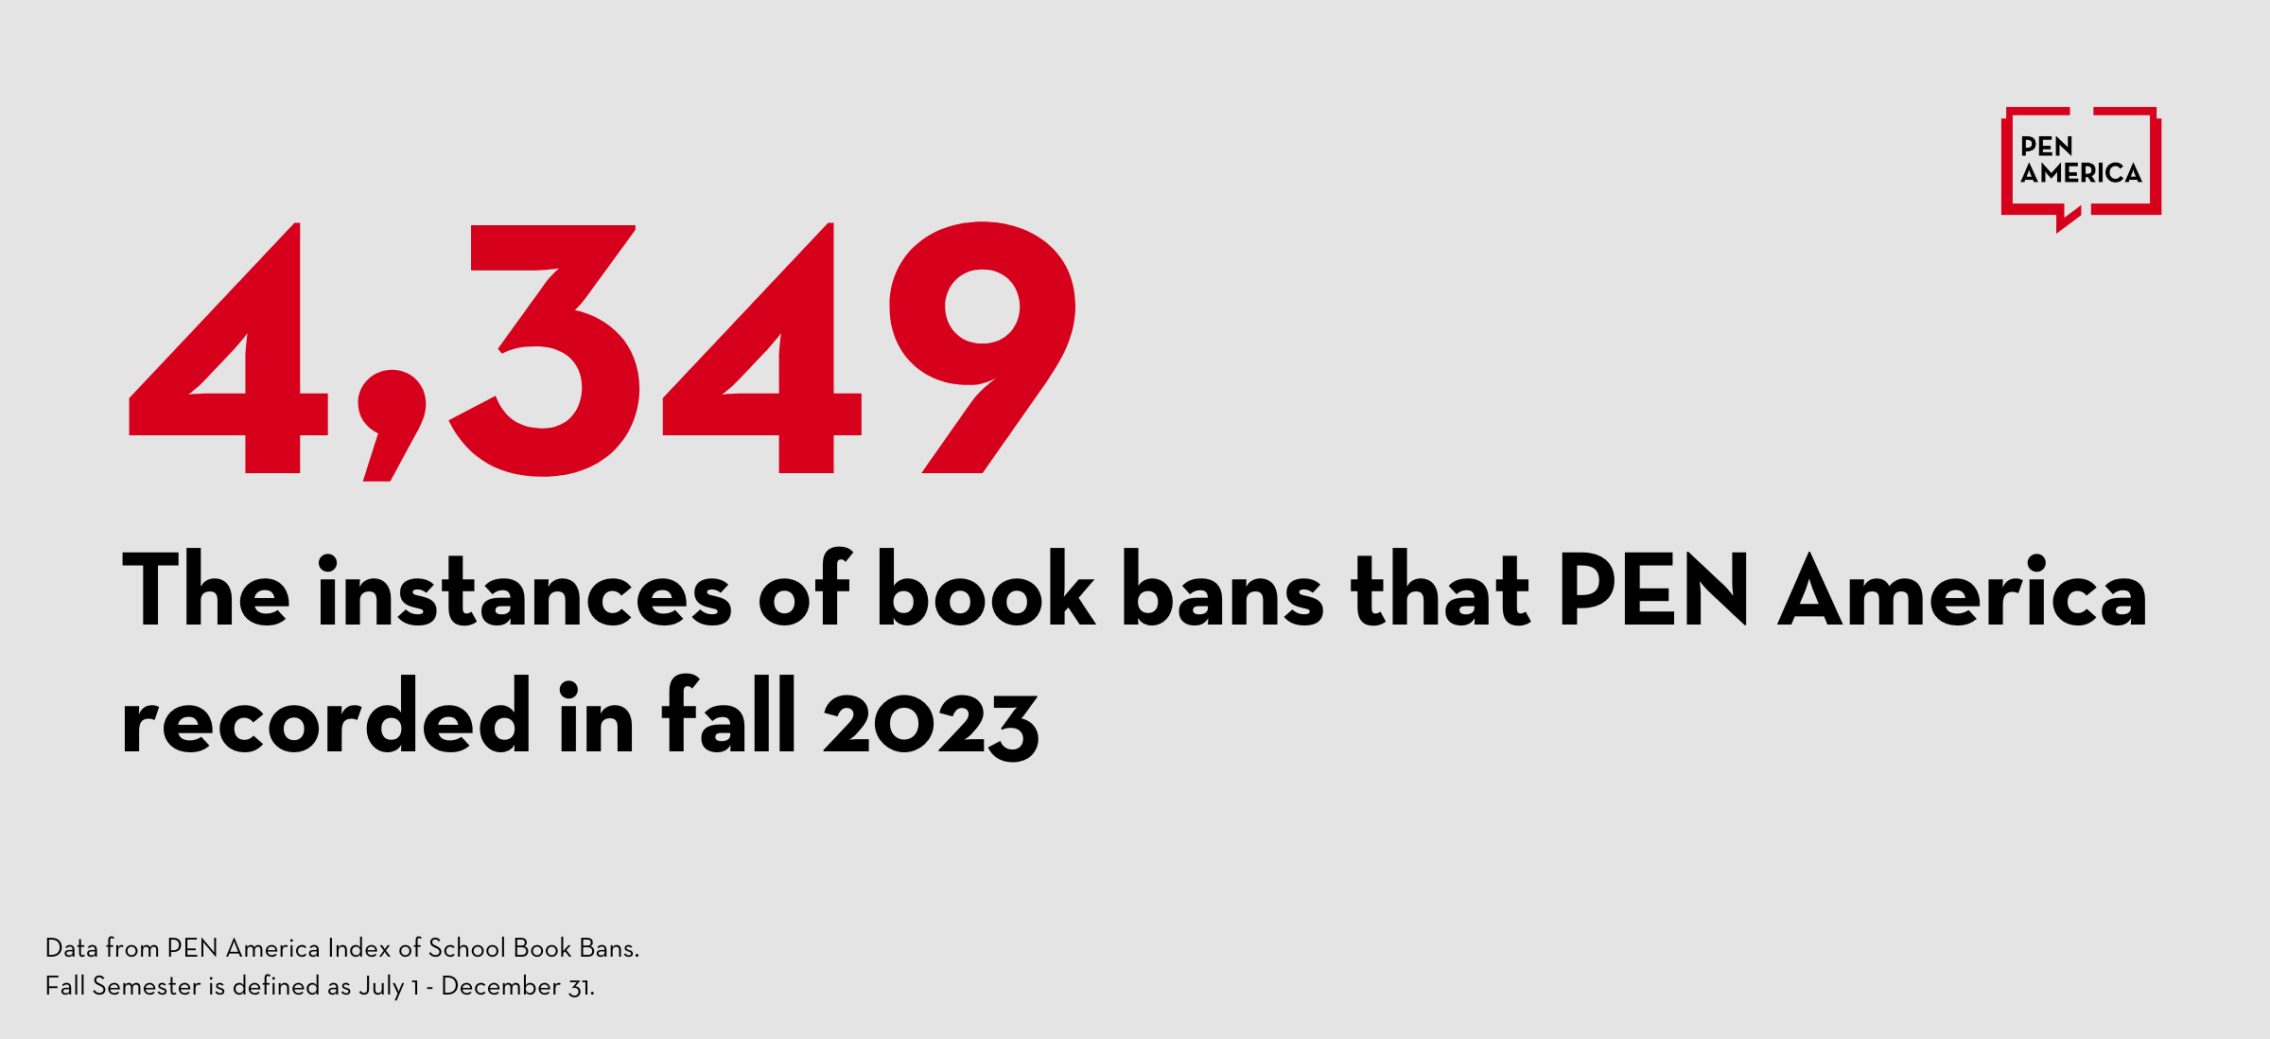 A graphic on a plain gray background with large red text reading "4,349" below it reads "The instances of book bans that PEN America recorded in fall 2023" in bolded black font. Small text at the bottom reads: "Data from PEN America Index of School Book Bans. Fall Semester is defined as July 1-December 31." In the top right corner is the PEN America logo (a red square text bubble with "PEN America" in the middle).